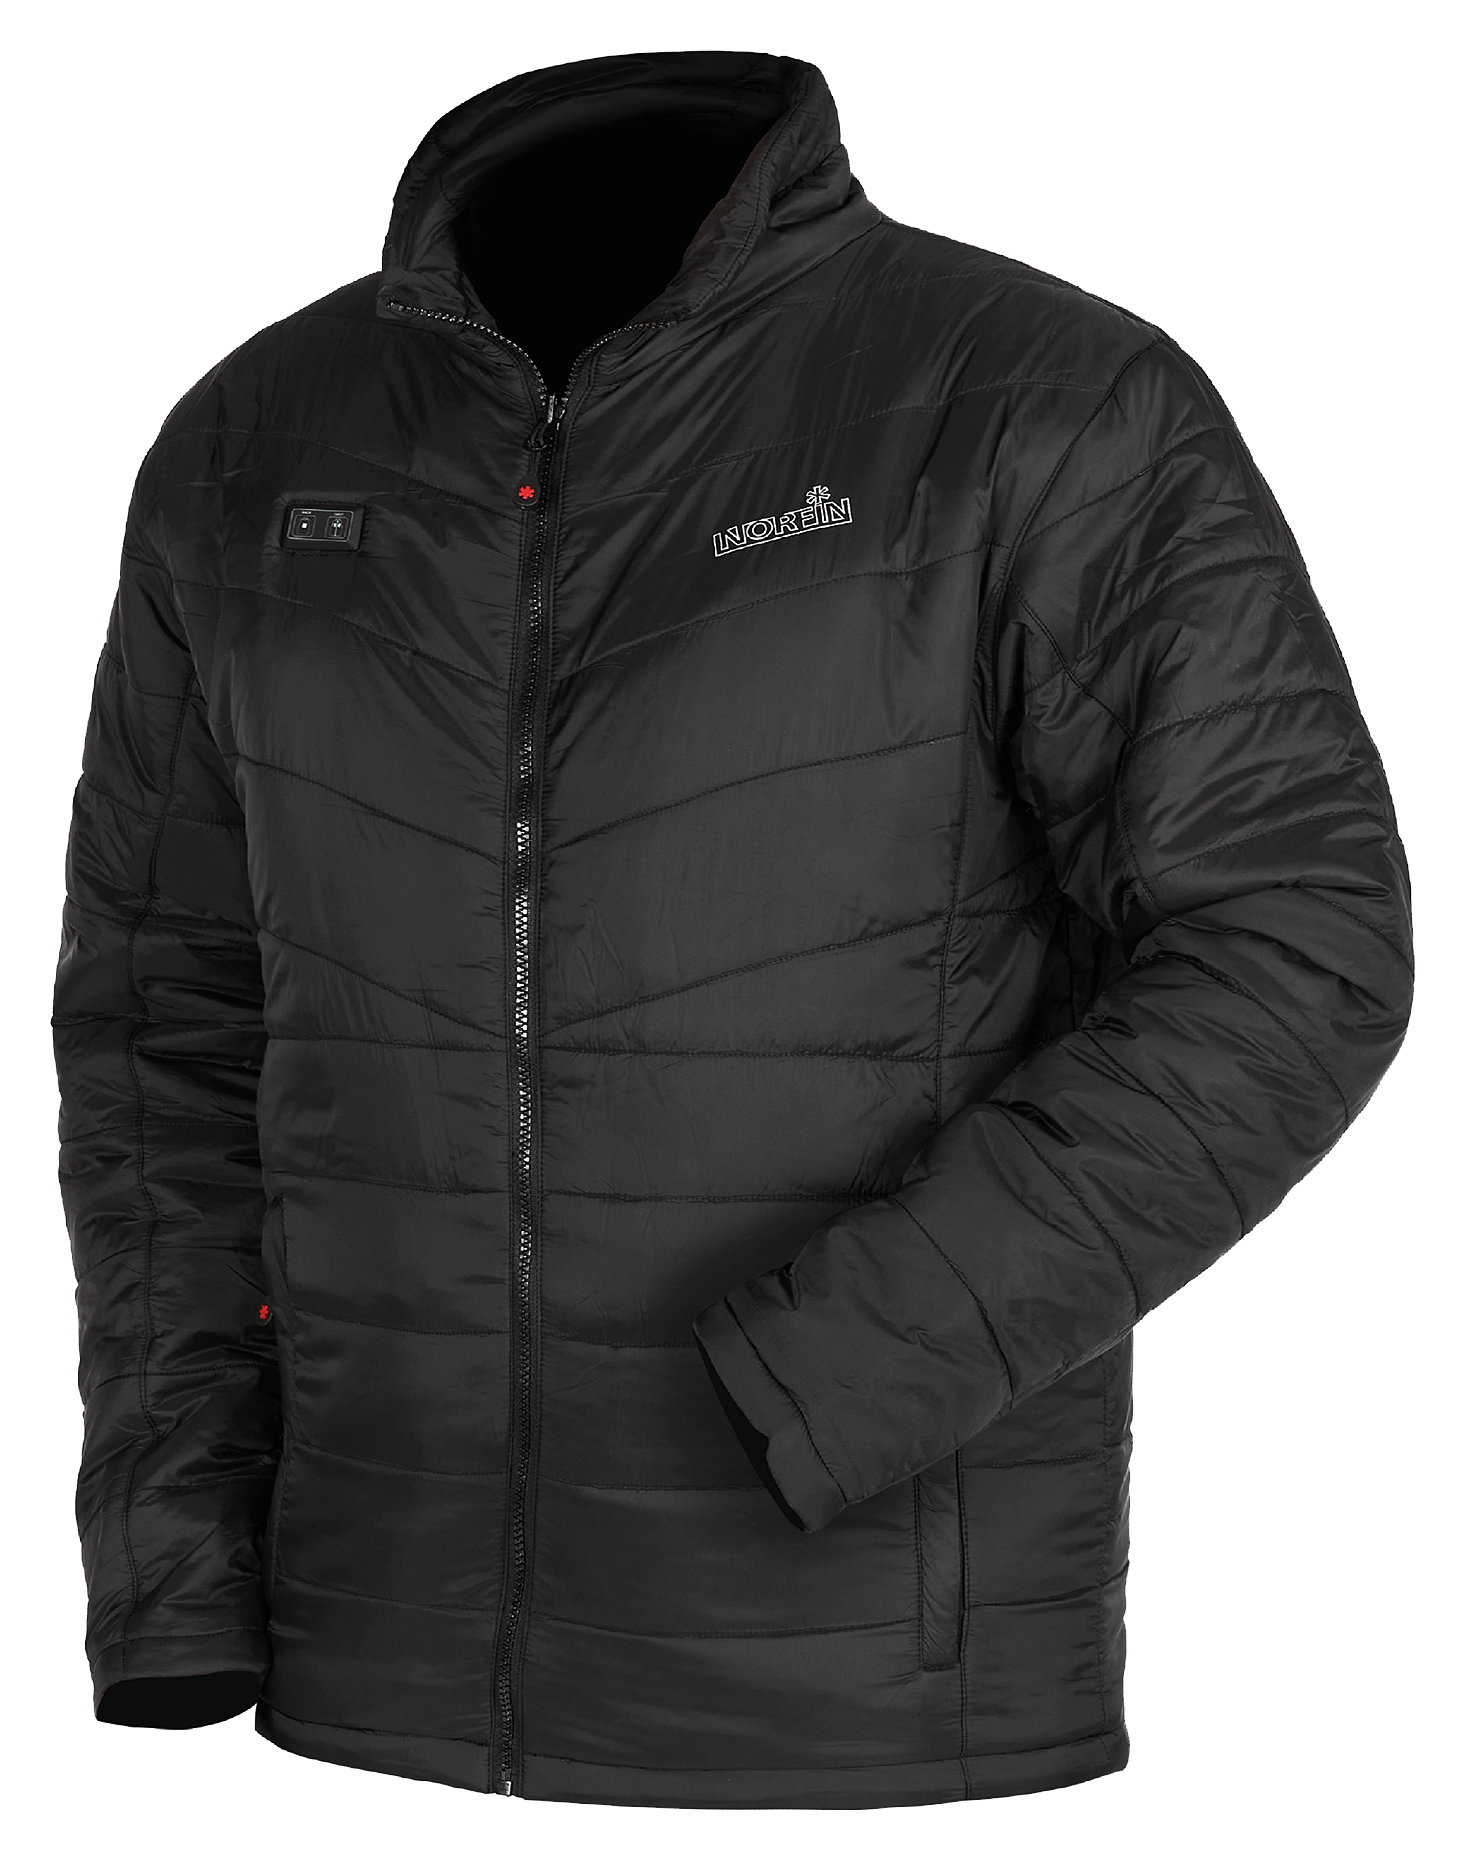 Norfin Extreme 5 Jacket Liner - Mens Black Extra Large 338404-XL